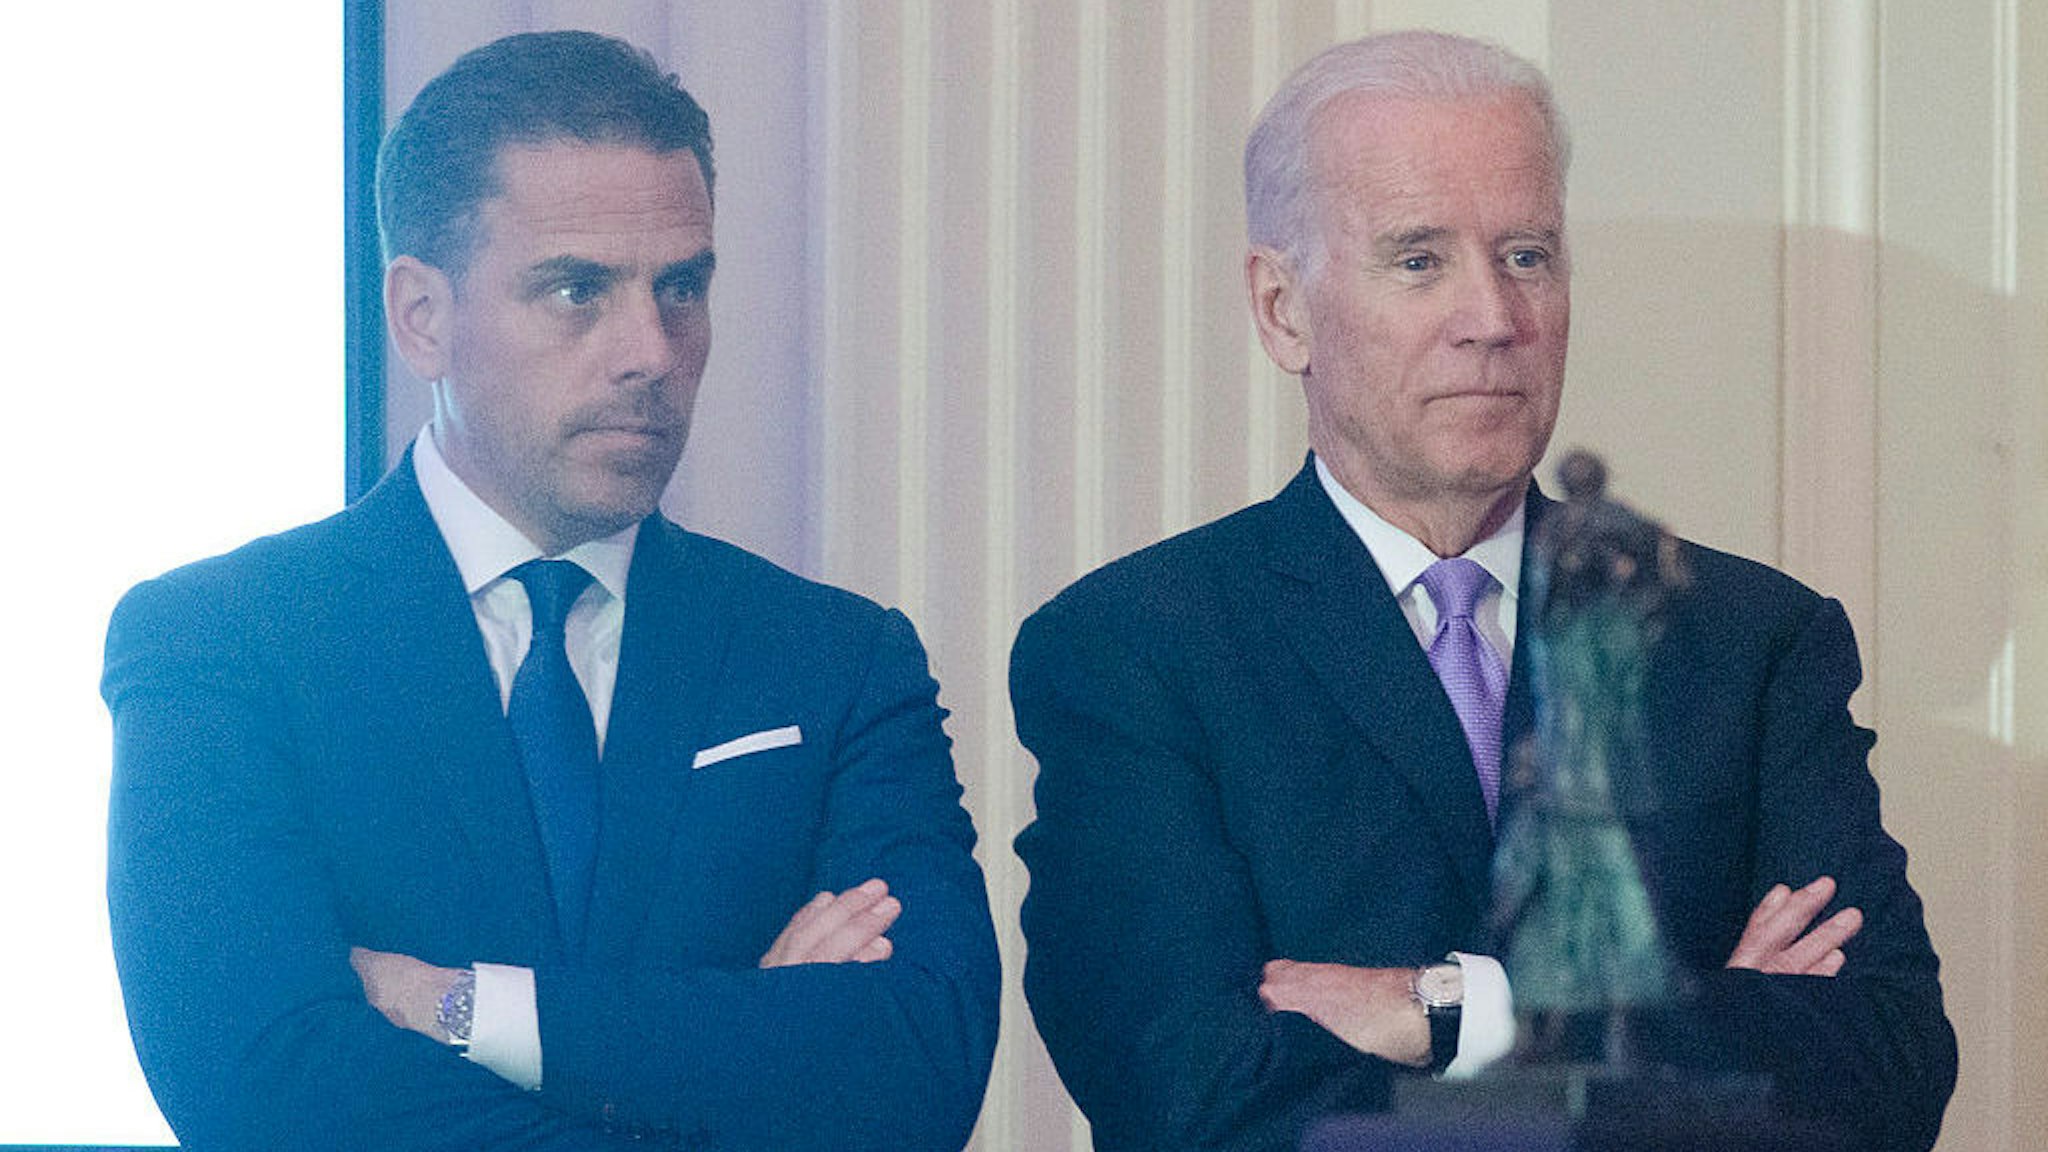 WASHINGTON, DC - APRIL 12: WFP USA Board Chair Hunter Biden introduces his father Vice President Joe Biden during the World Food Program USA's 2016 McGovern-Dole Leadership Award Ceremony at the Organization of American States on April 12, 2016 in Washington, DC. (Kris Connor/WireImage)